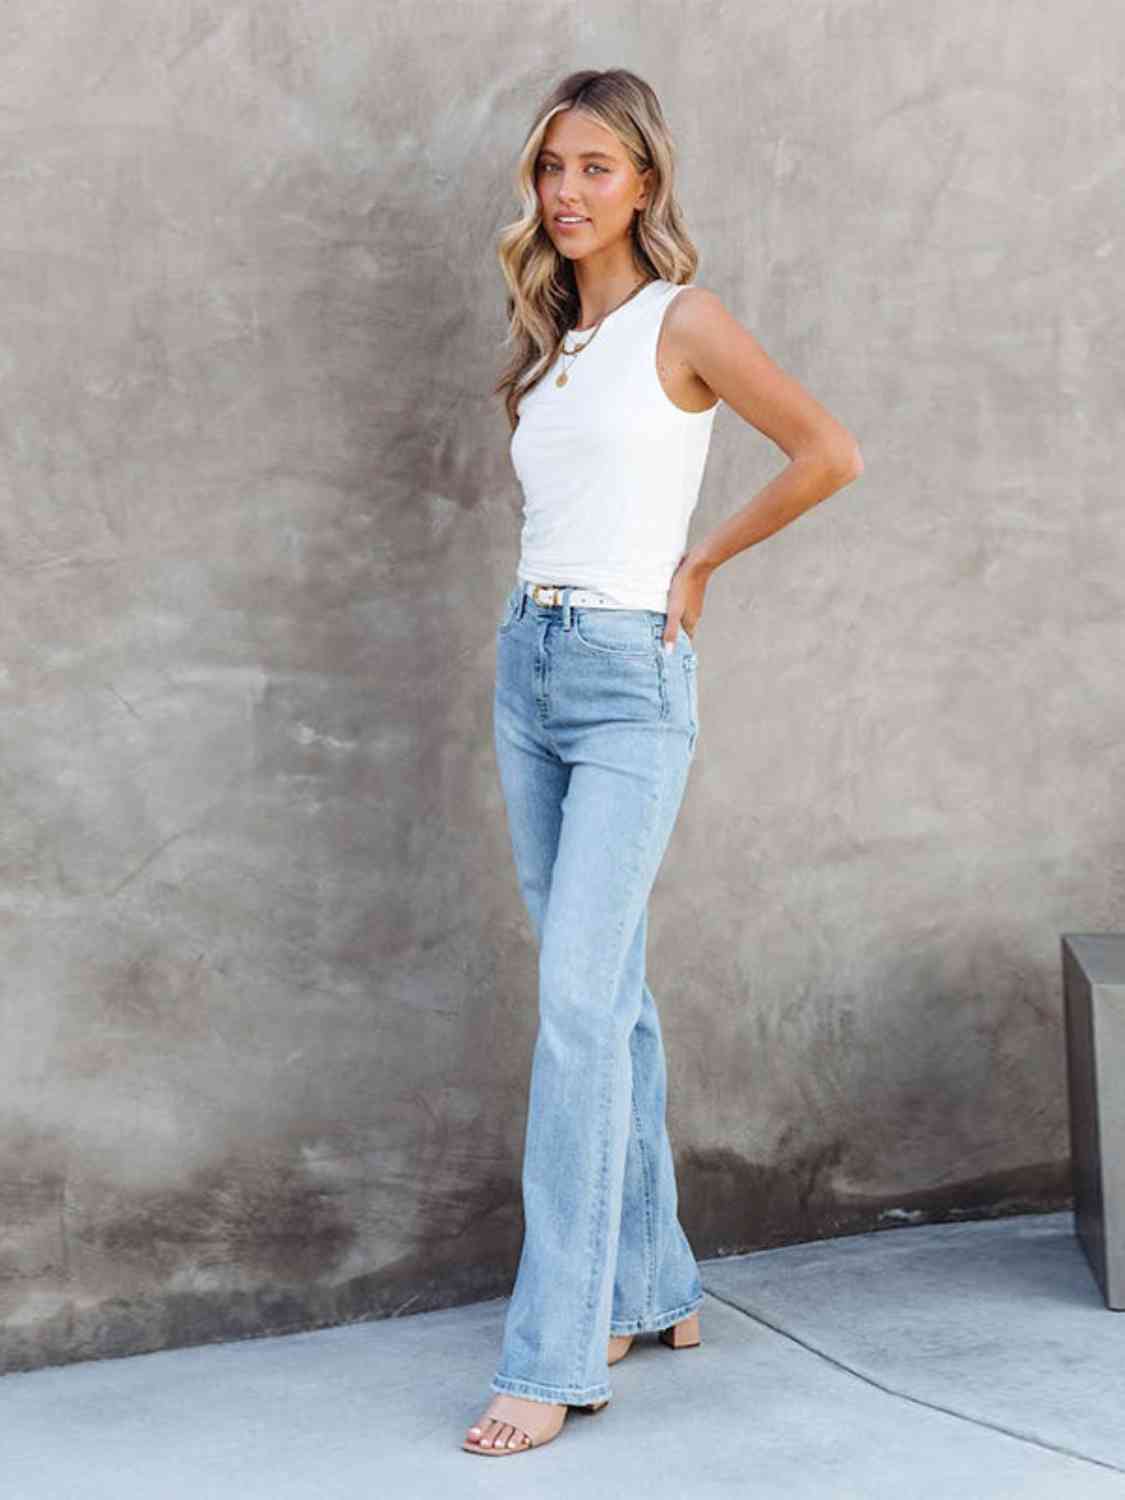 KHD Washed Straight Leg Jeans